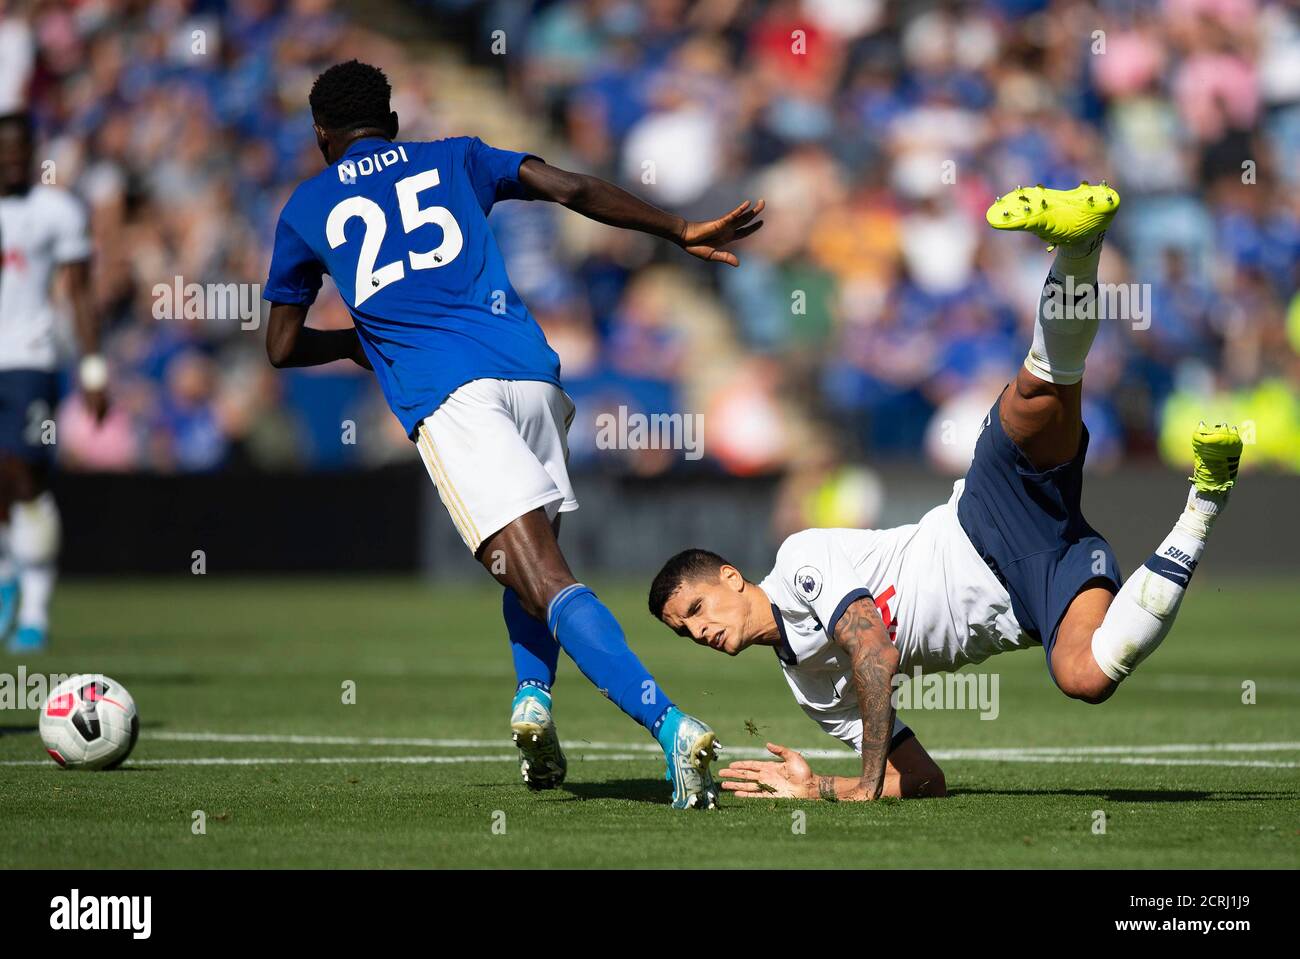 Tottenham Hotspurs' Erik Lamela flies through the air after a tackle from Wilfred Ndidi PHOTO CREDIT : © MARK PAIN / ALAMY STOCK PHOTO Stock Photo